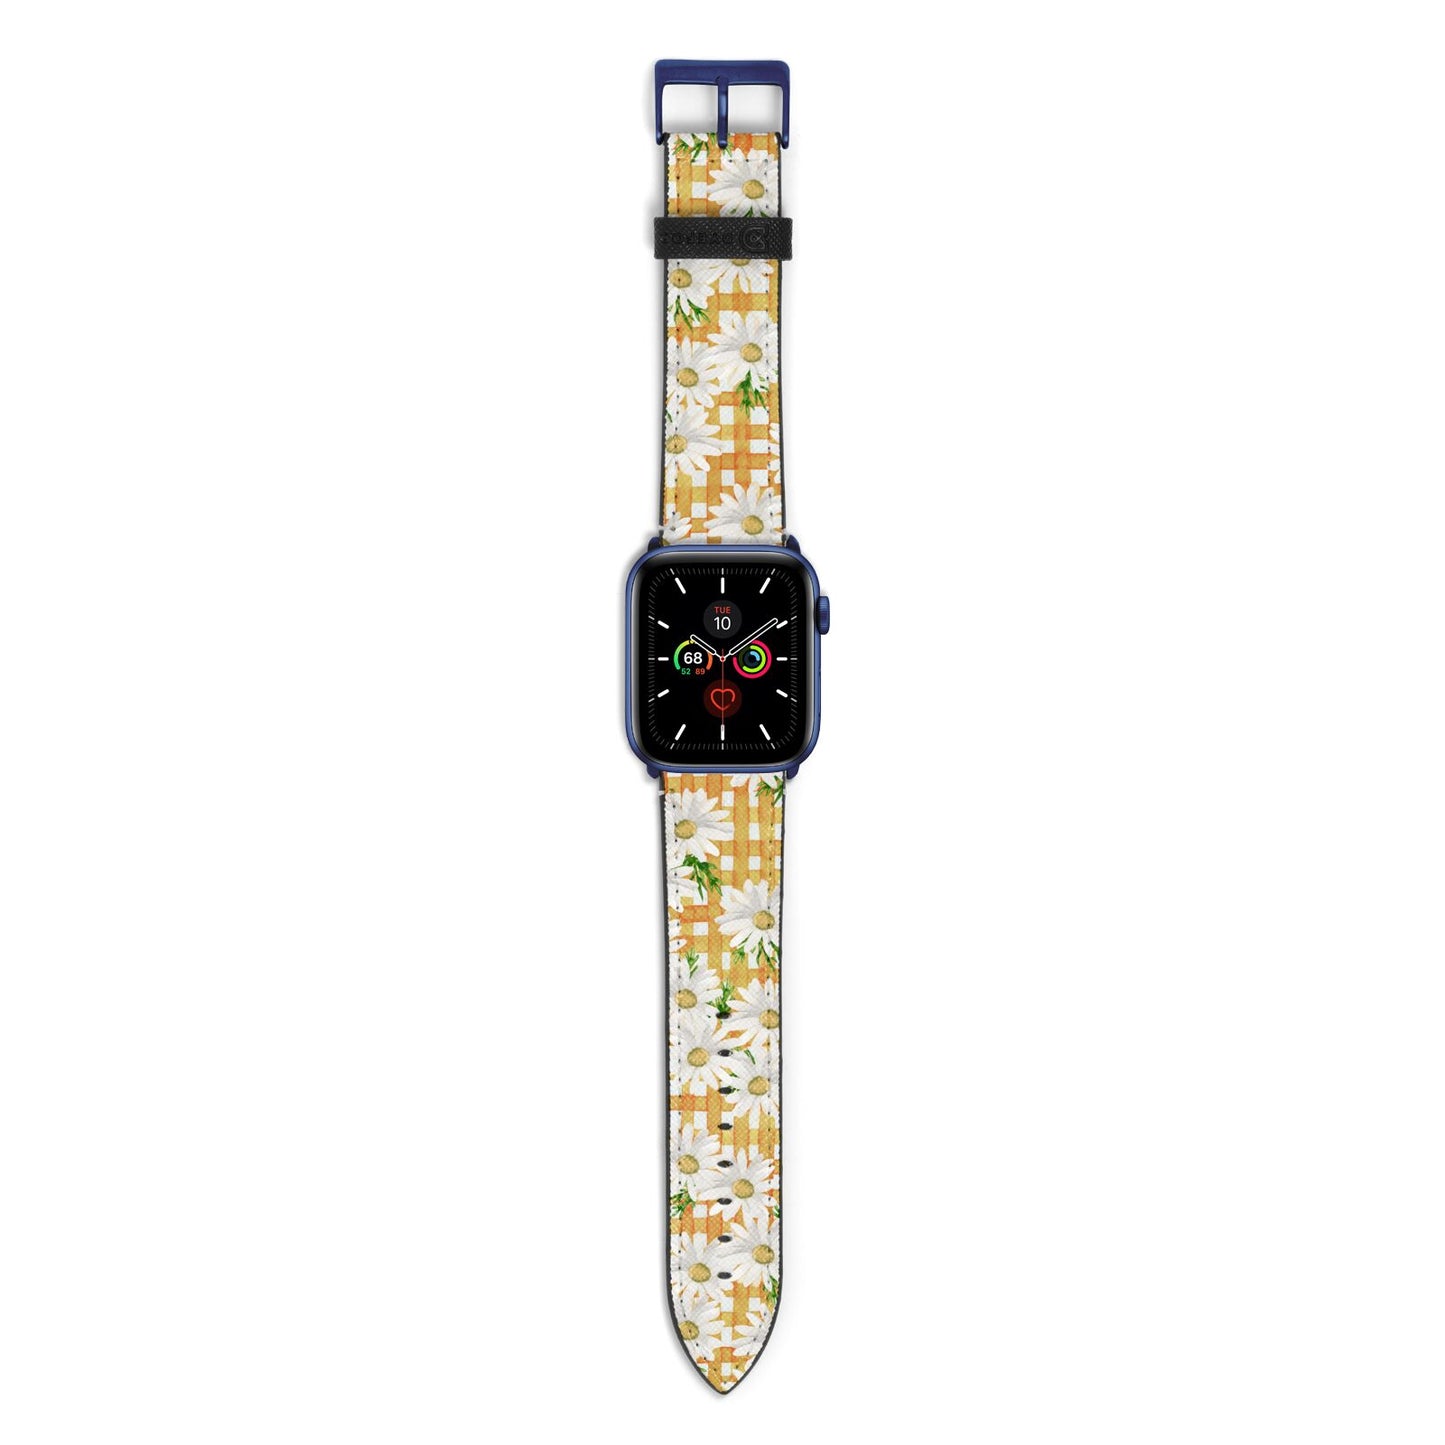 Checkered Daisy Apple Watch Strap with Blue Hardware